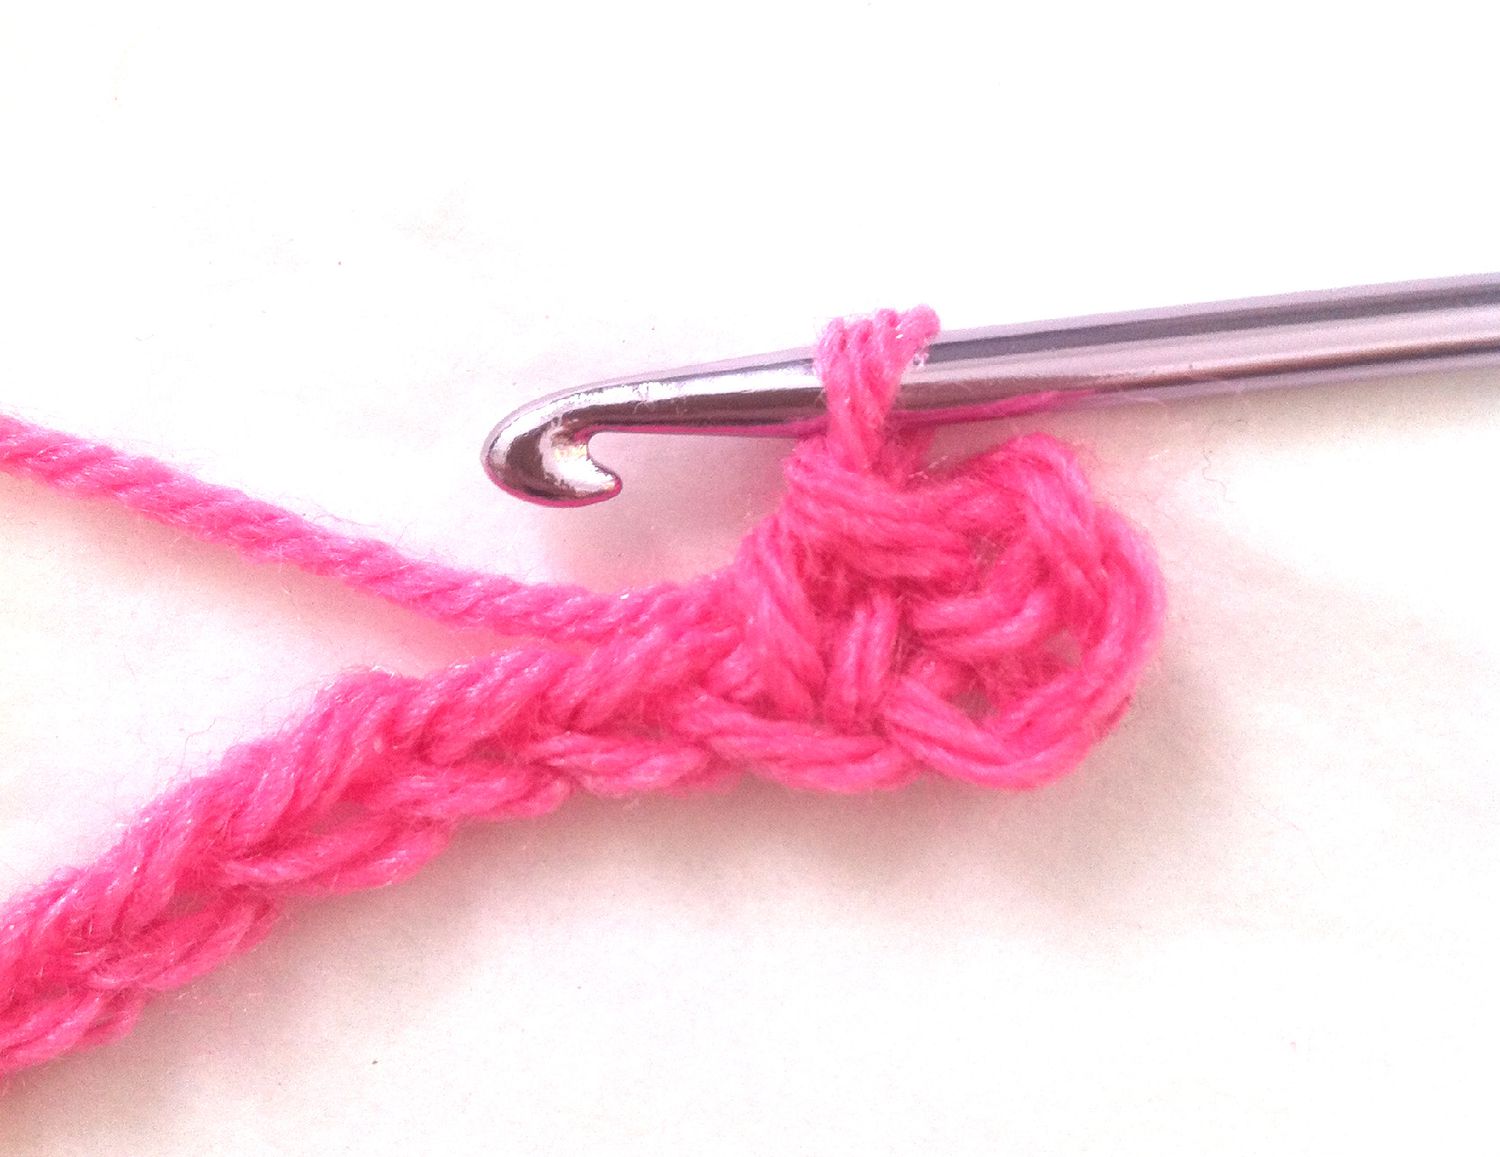 First stitches in seed stitch crochet